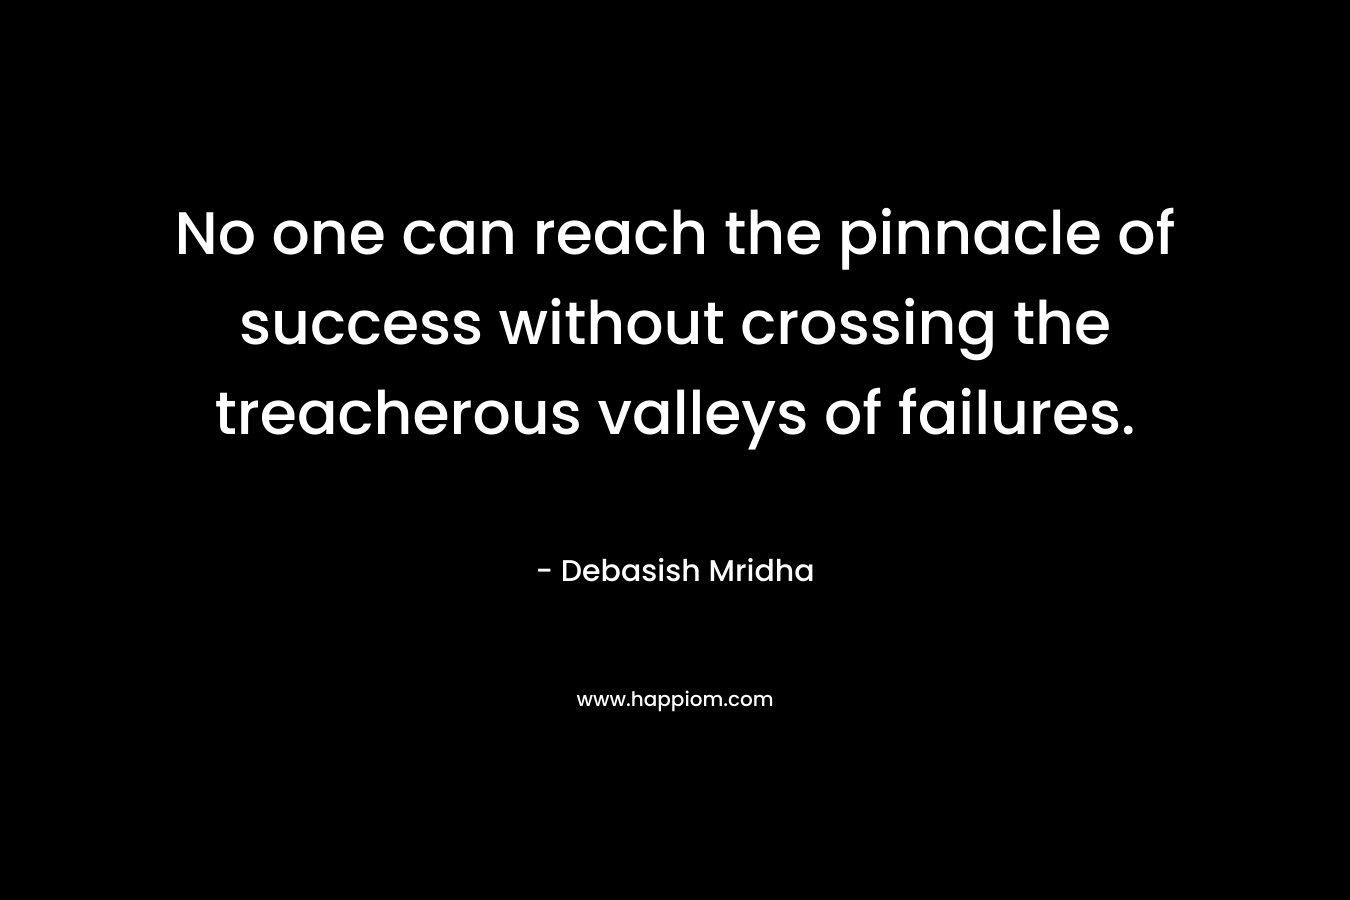 No one can reach the pinnacle of success without crossing the treacherous valleys of failures. – Debasish Mridha